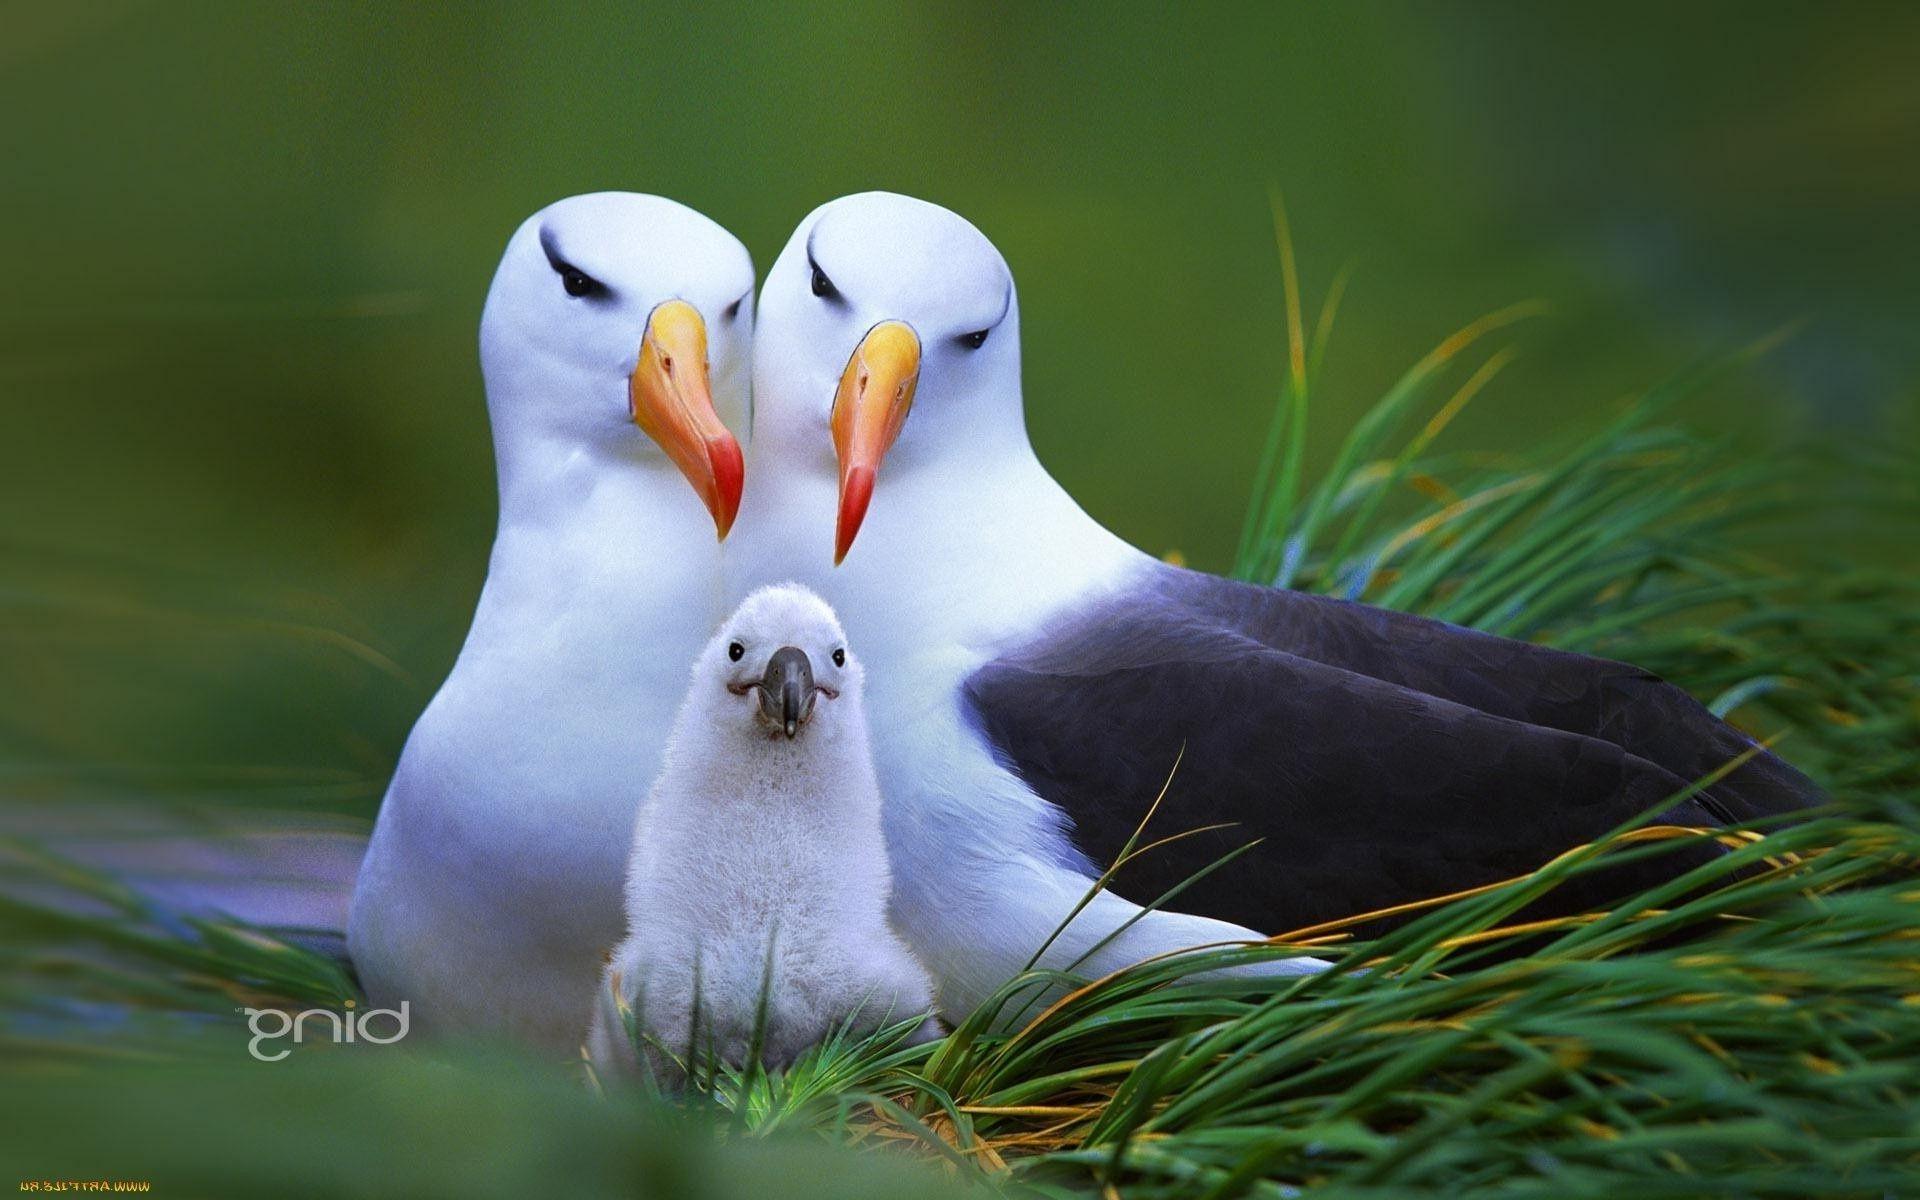 Albatross chick. Android wallpaper for free